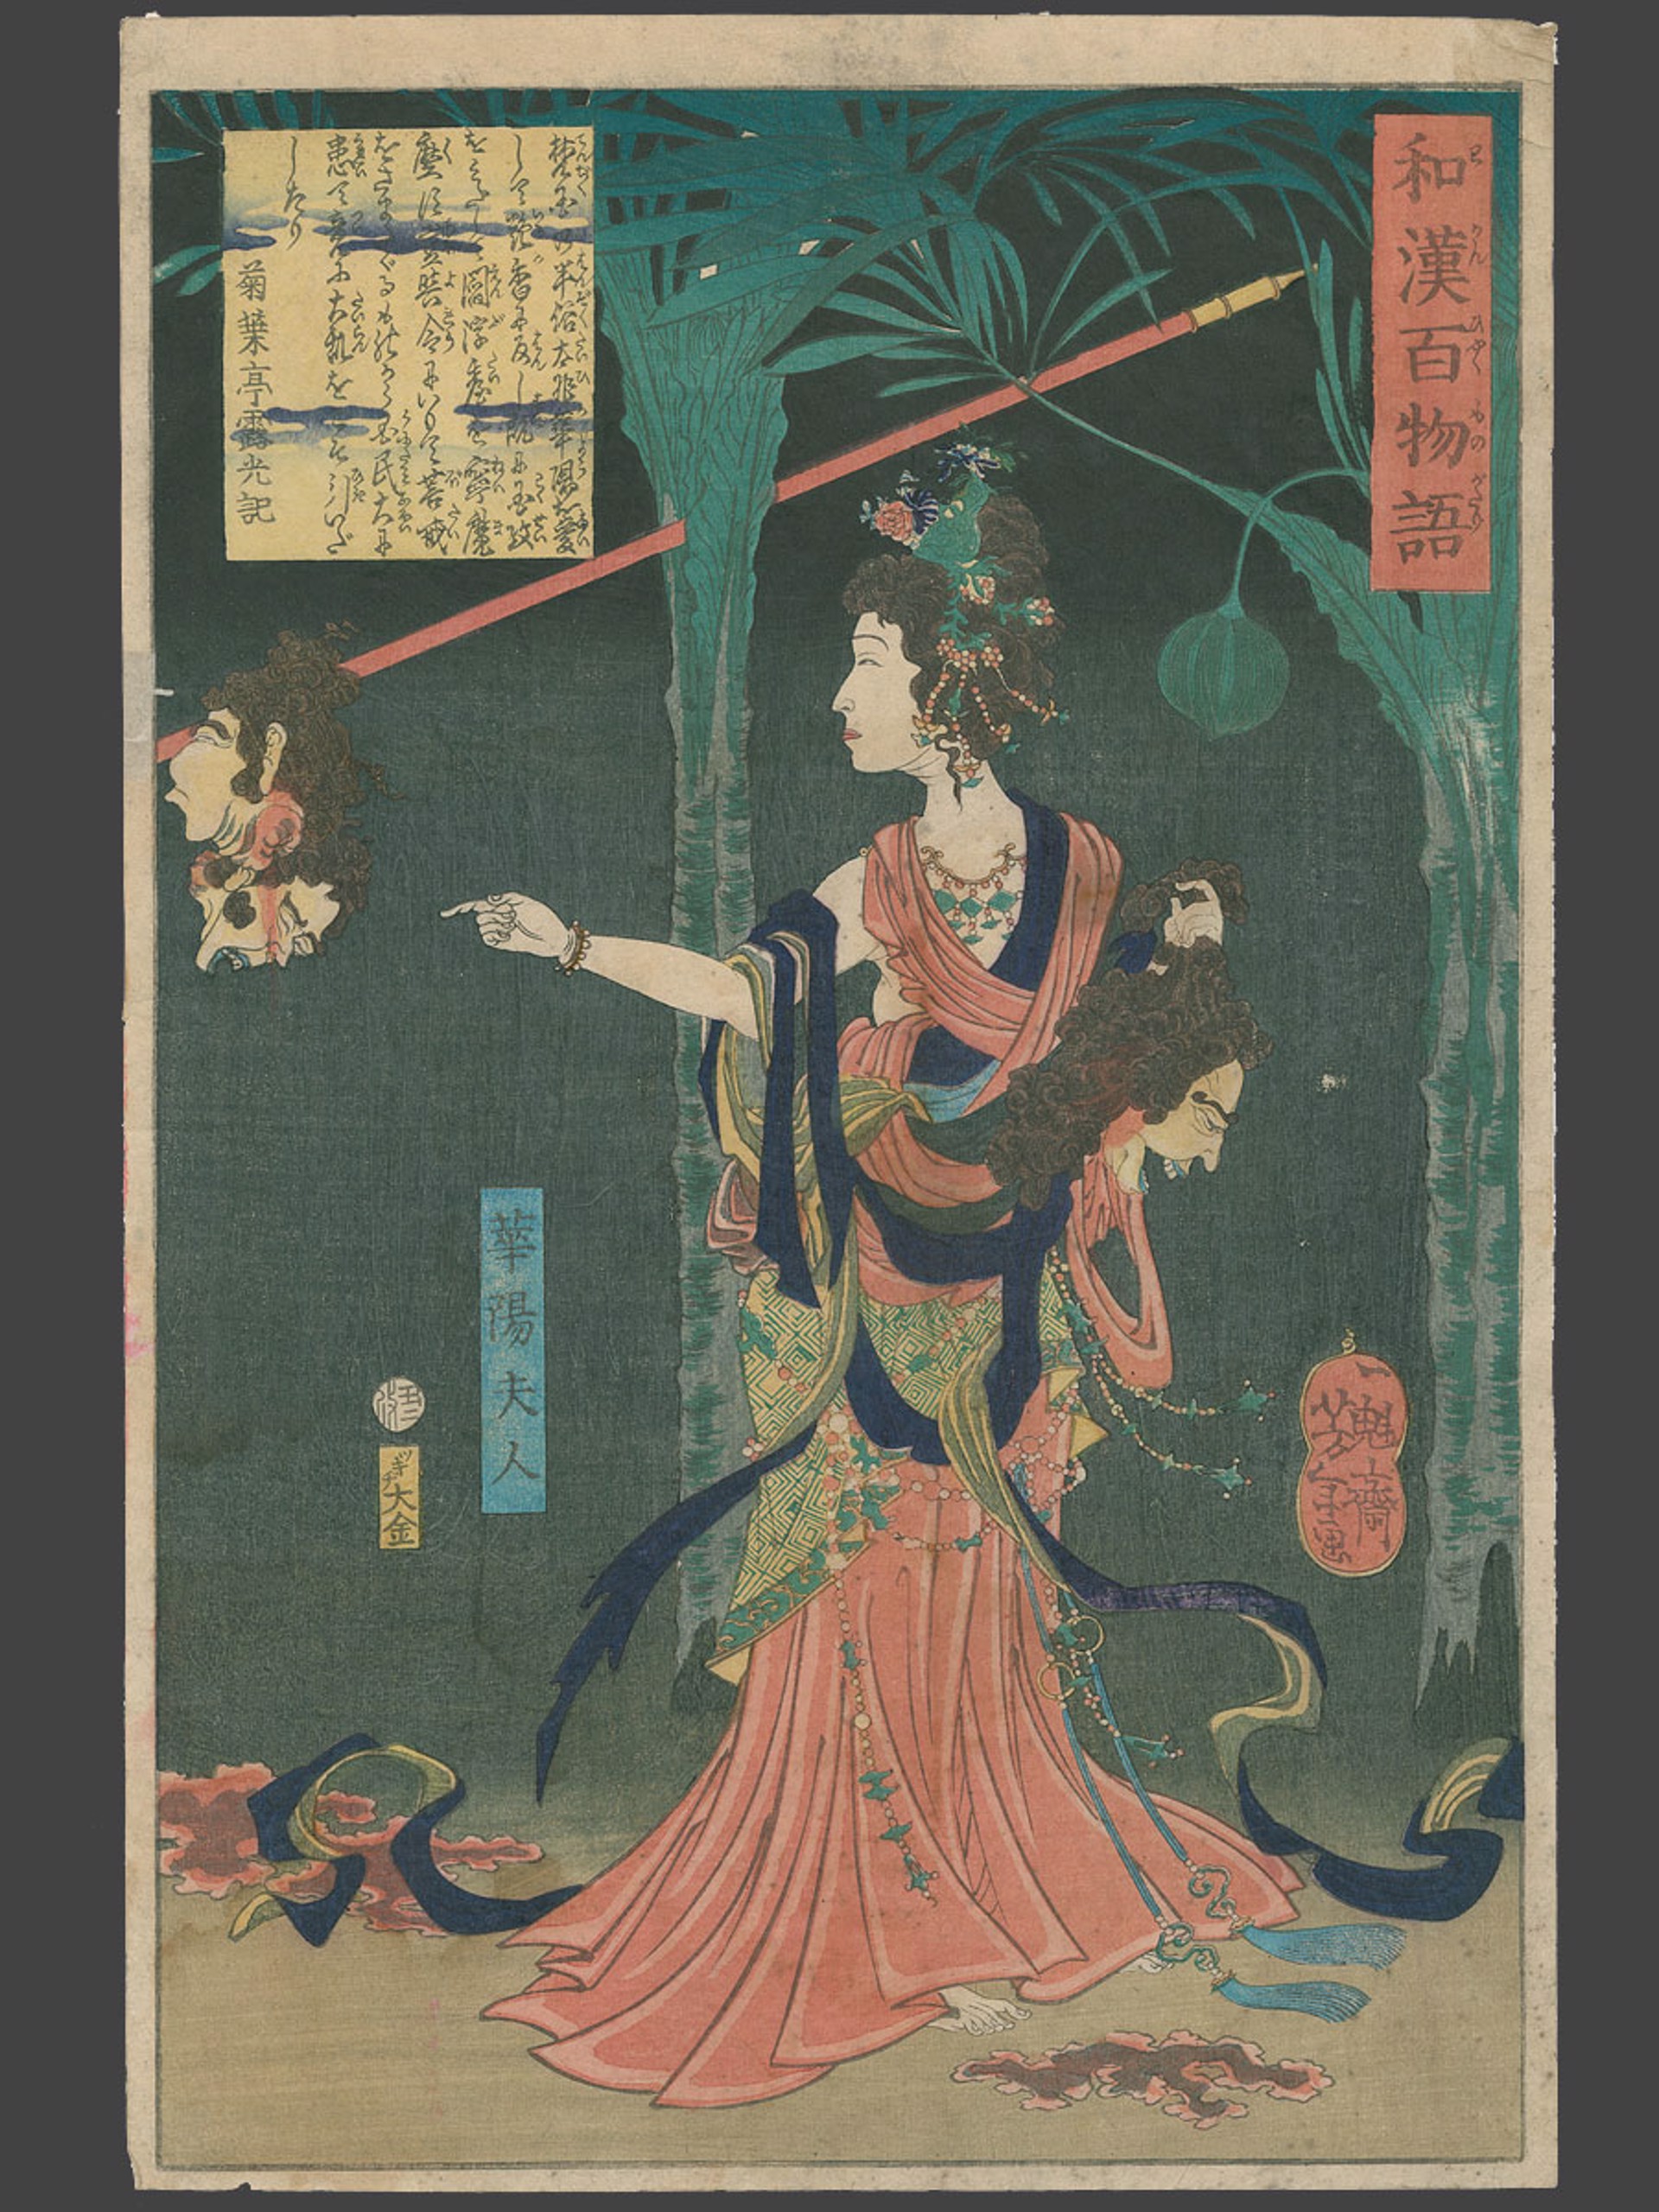 Kayo Fujin, Consort of Prince Hanzokun of India, with a Severed Head 100 Ghost Stories of China and Japan by Yoshitoshi